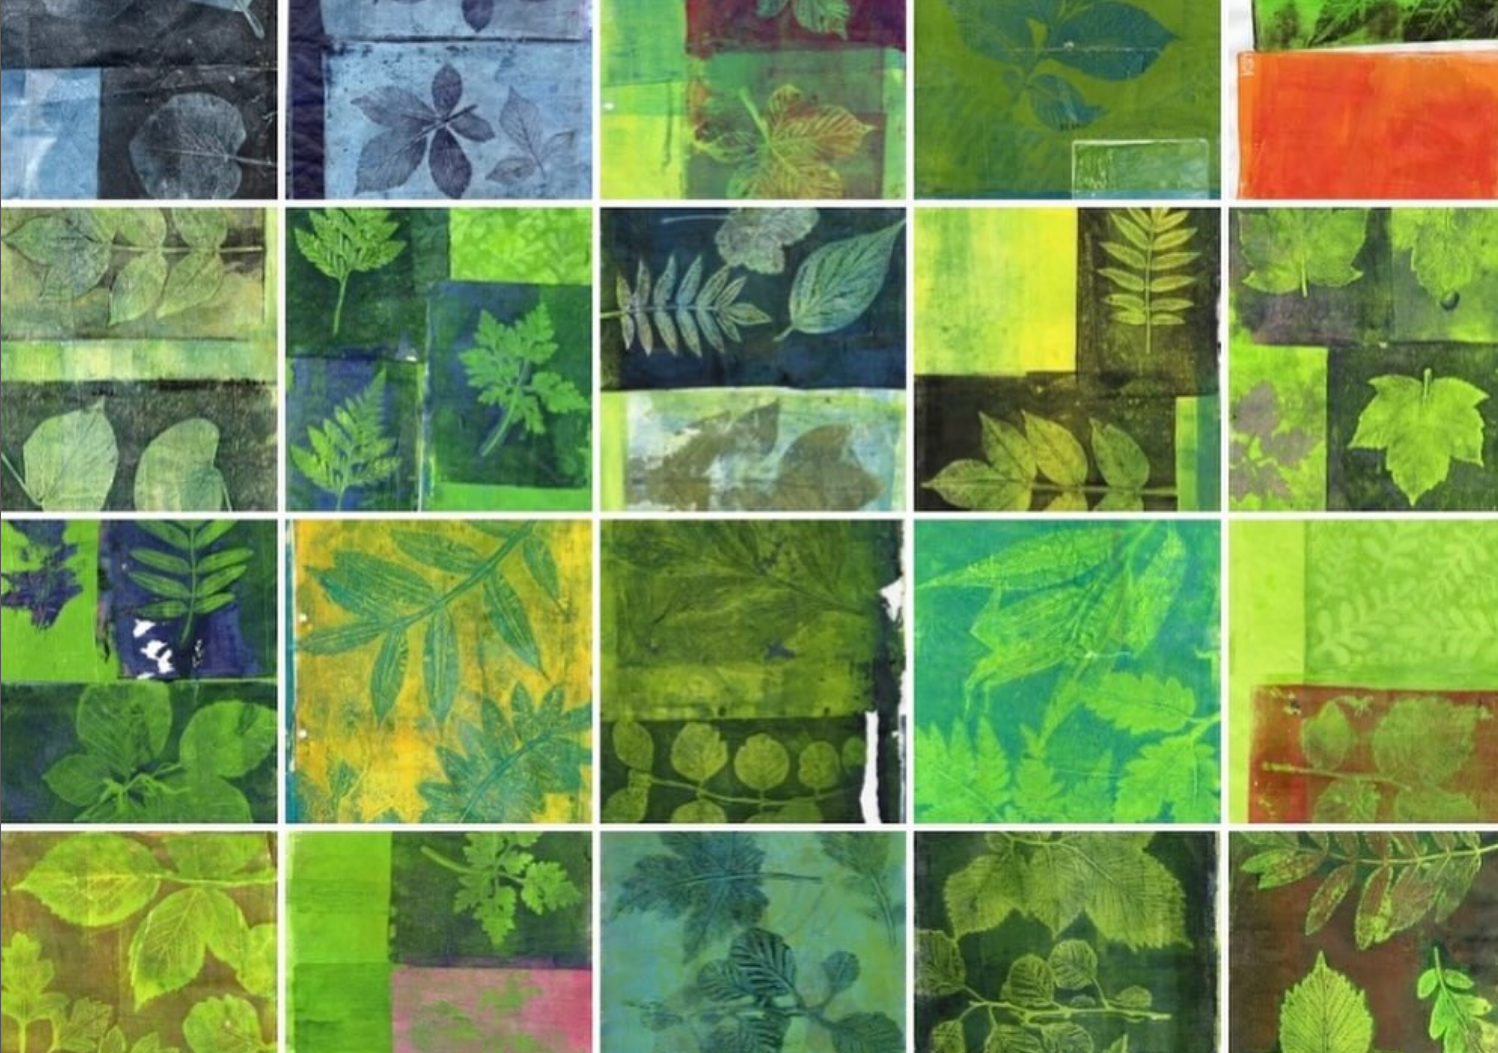 Collection of monoprint images using leaves